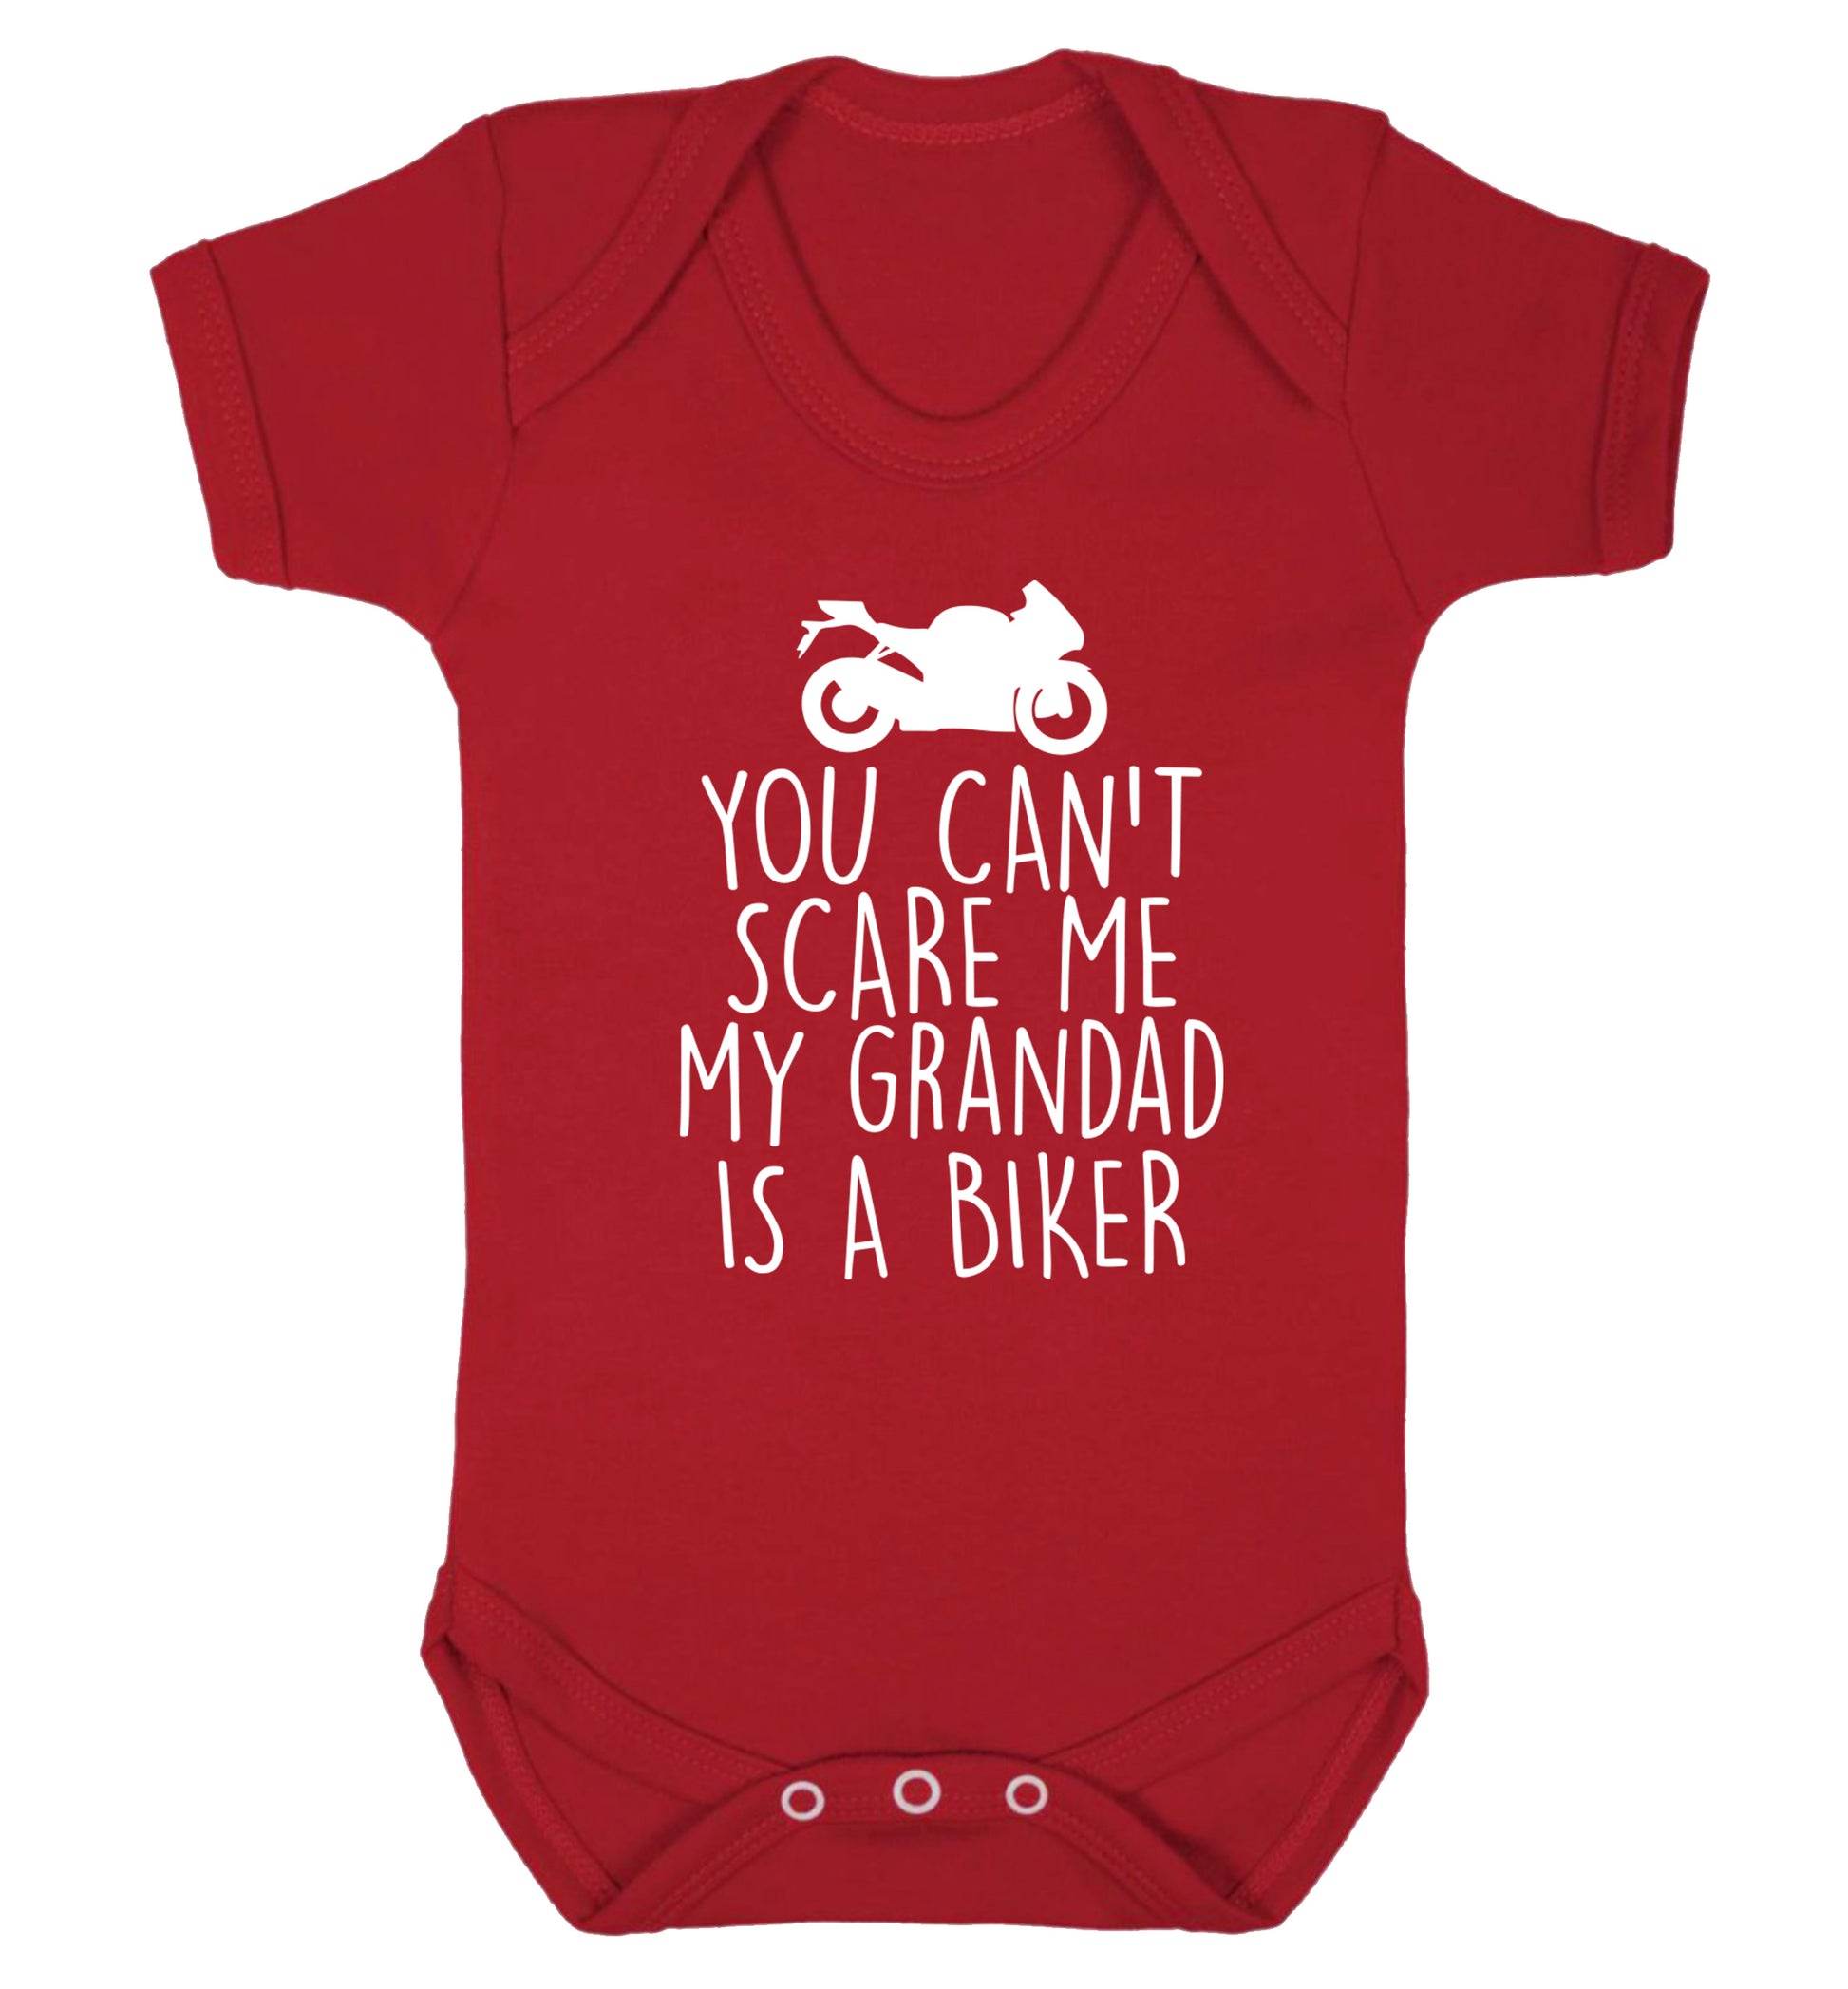 You can't scare me my grandad is a biker Baby Vest red 18-24 months